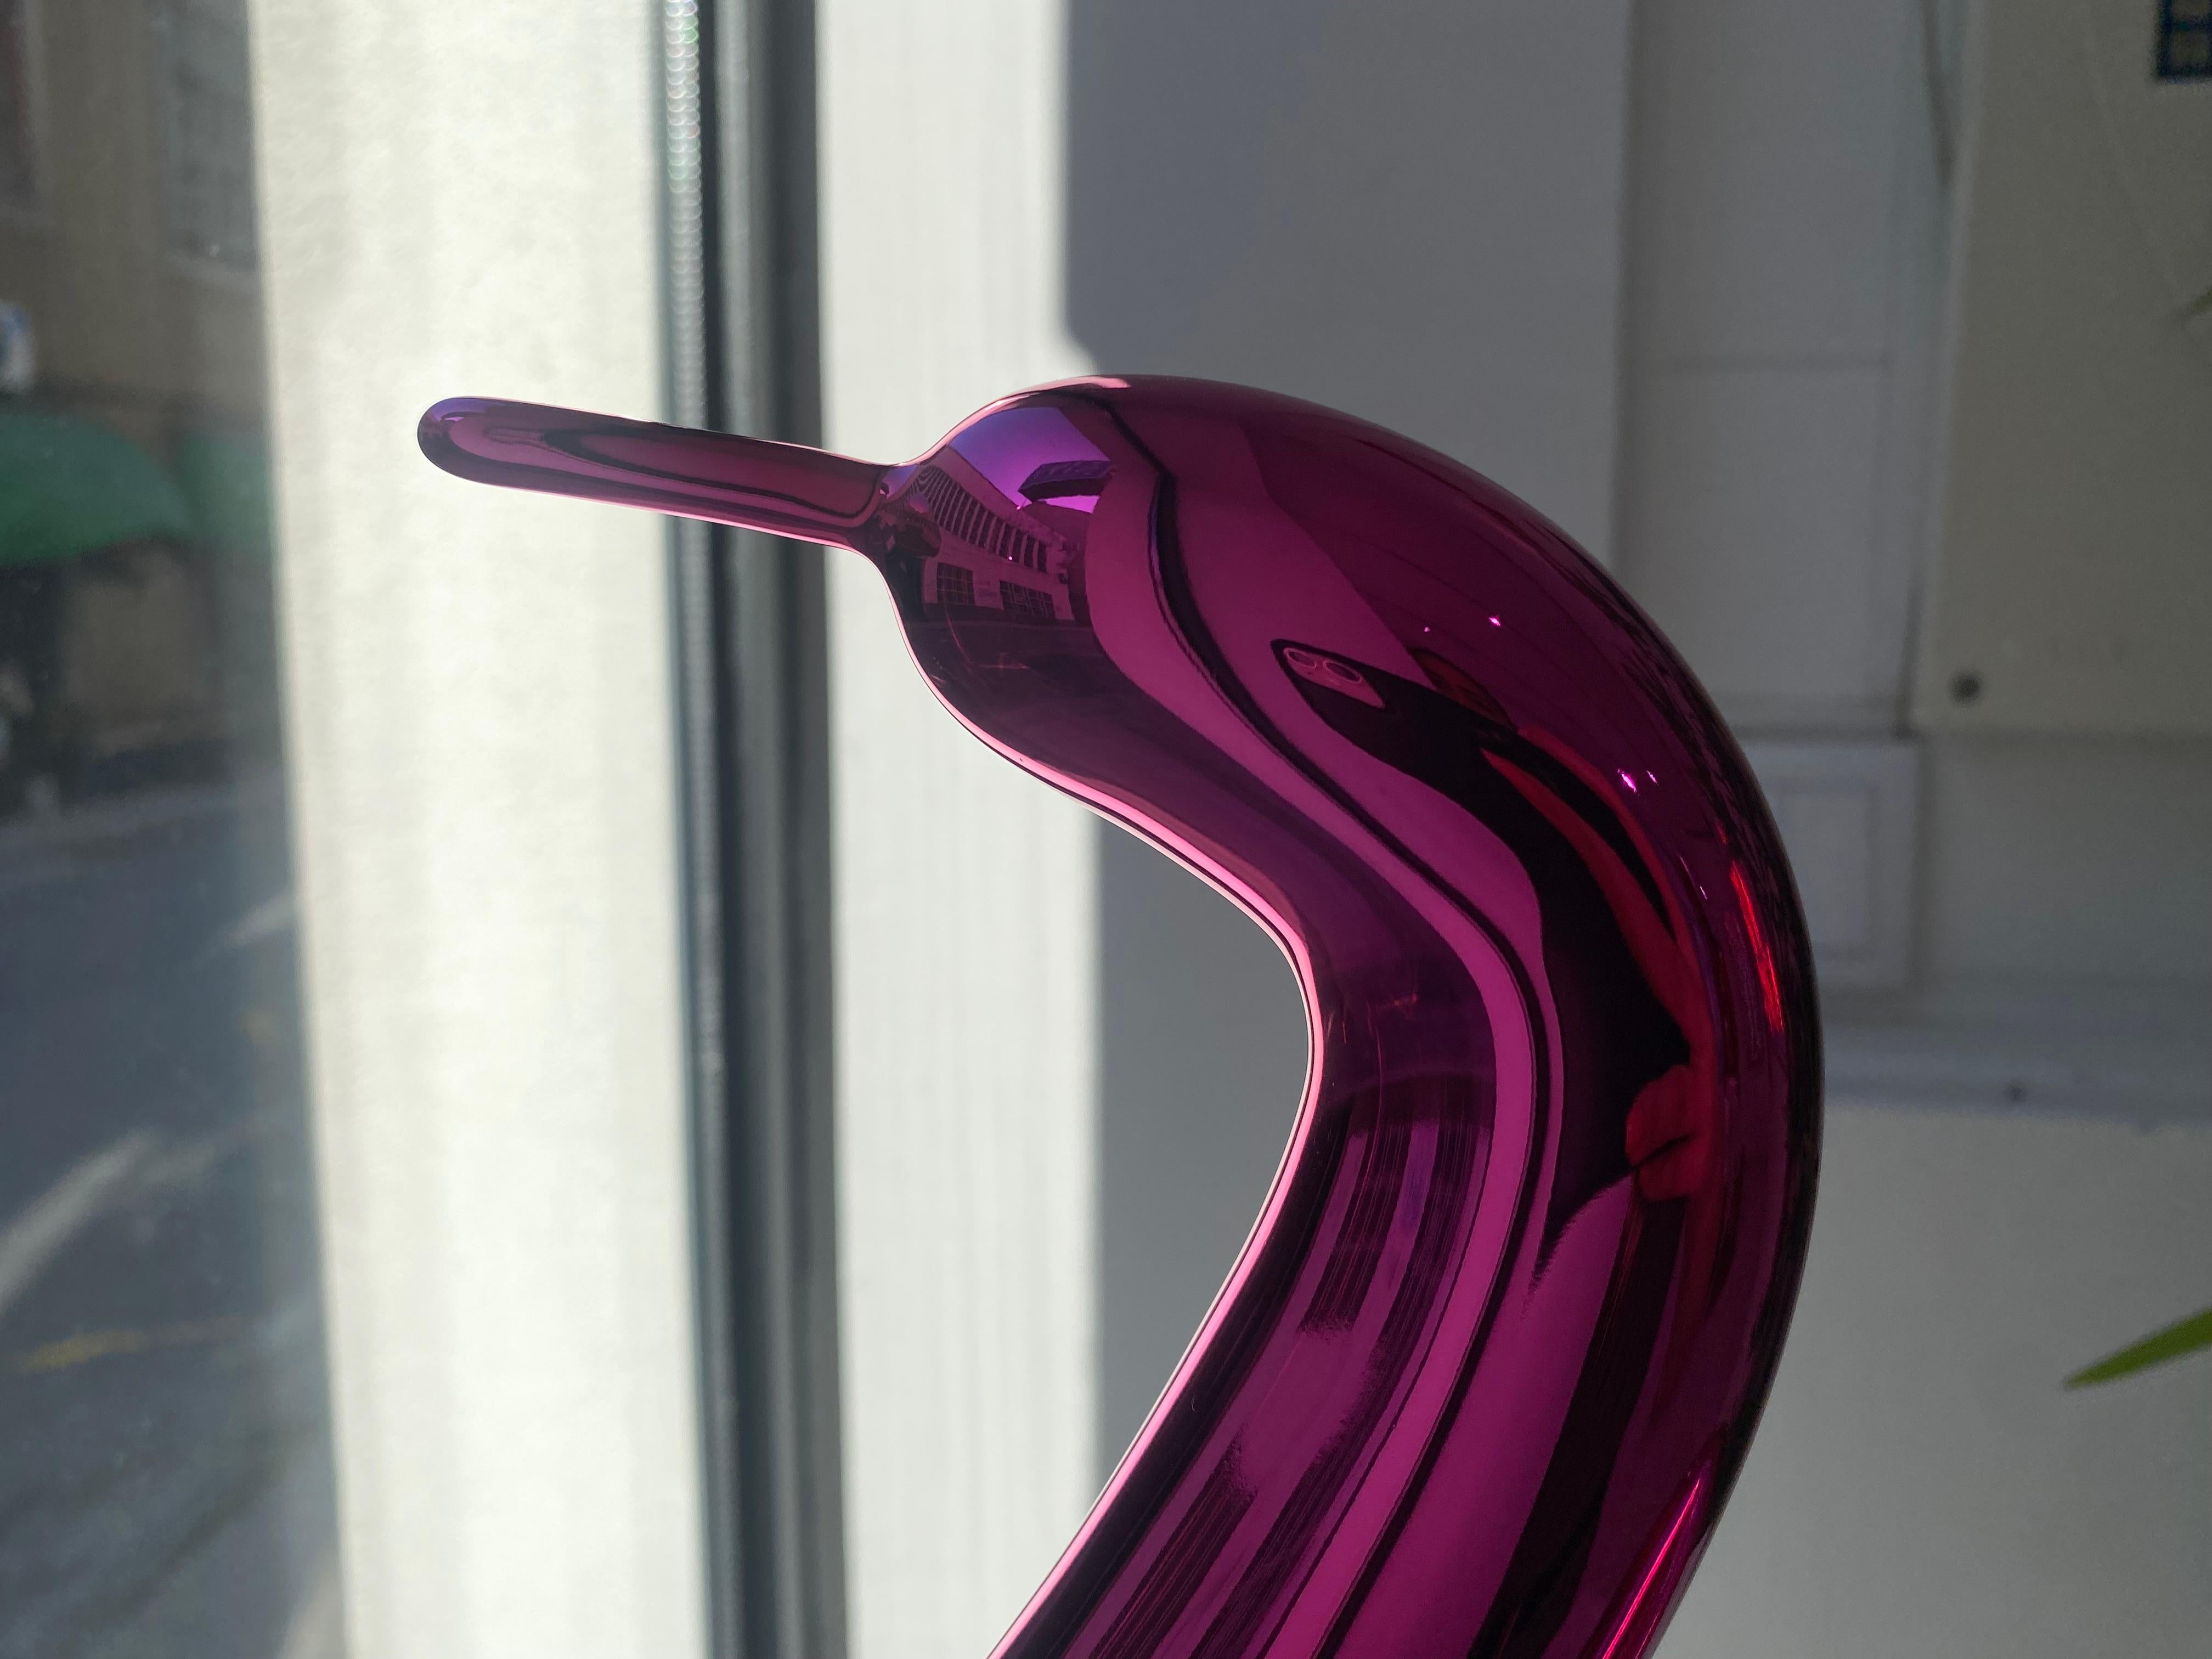 Limited Edition of 999.

Jeff Koons transforms a simple twisted balloon swan into a reflective magenta porcelain for his limited edition, Balloon Swan (Magenta). The original Balloon Swan, 2004–2011, is a monumental sculpture, standing over 3 meters